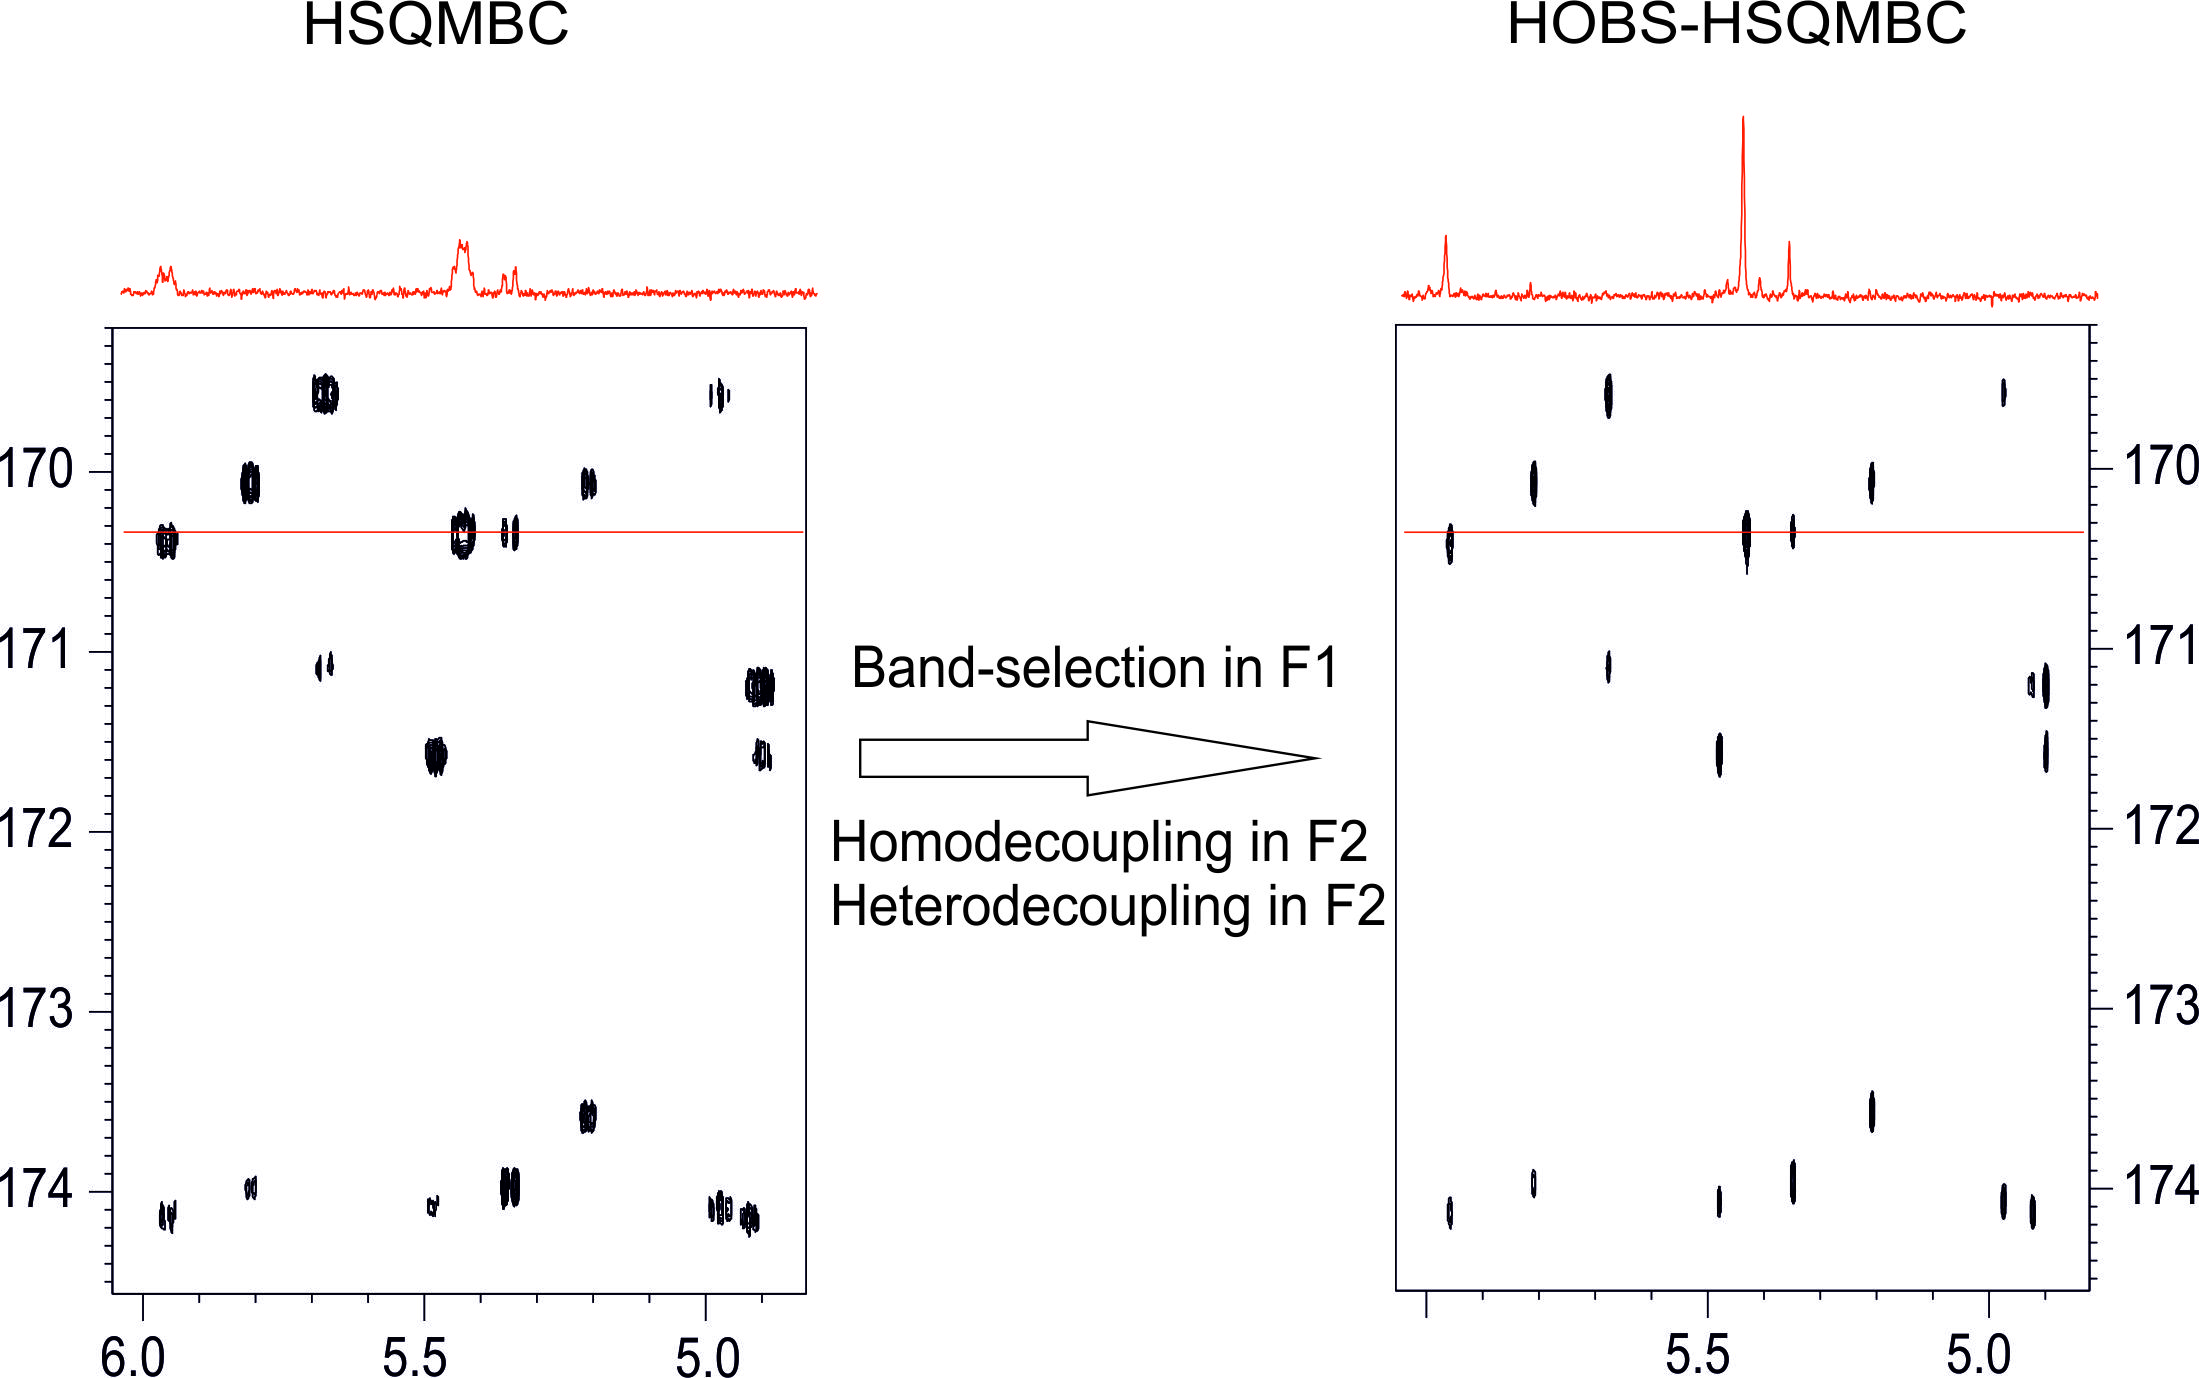 Implementing homo- and heterodecoupling in region-selective HSQMBC experiments